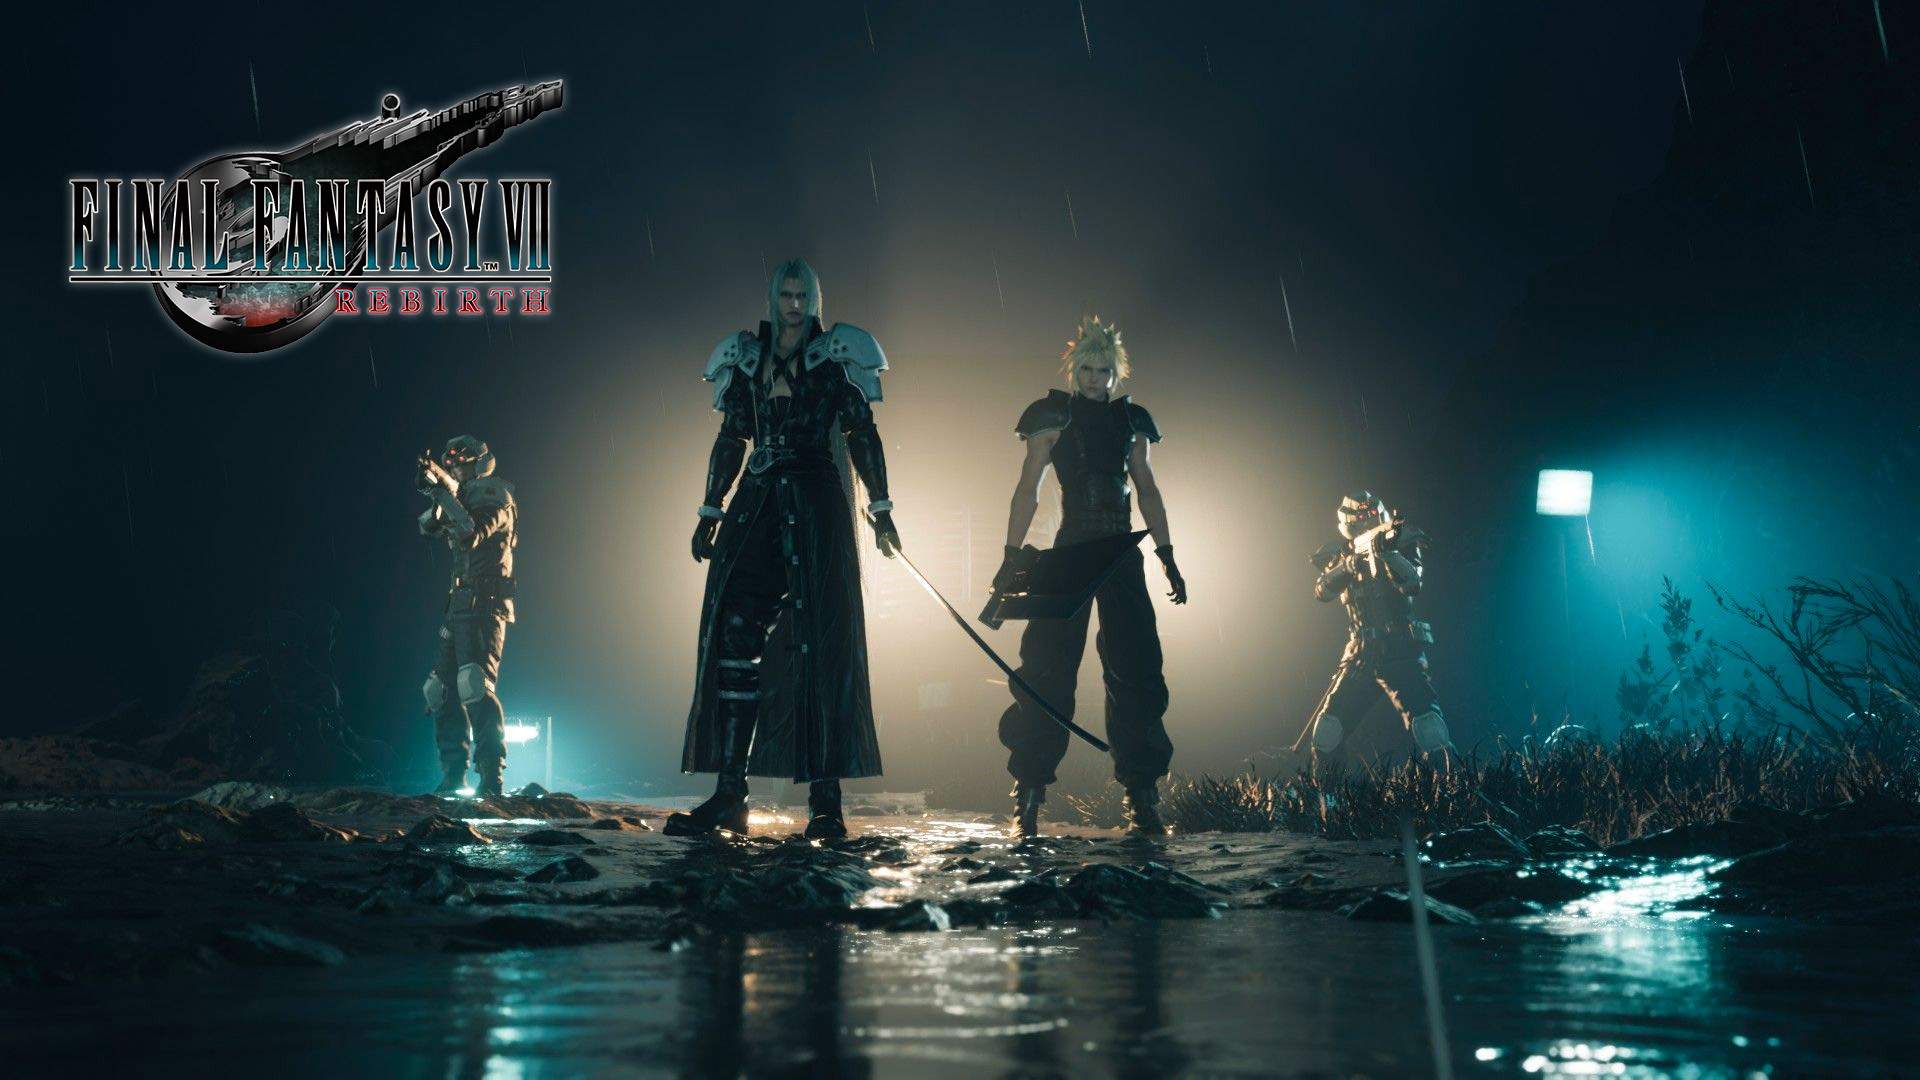 Sephiroth and Cloud standing in the center, while an accompanying soldier stands alongside both.